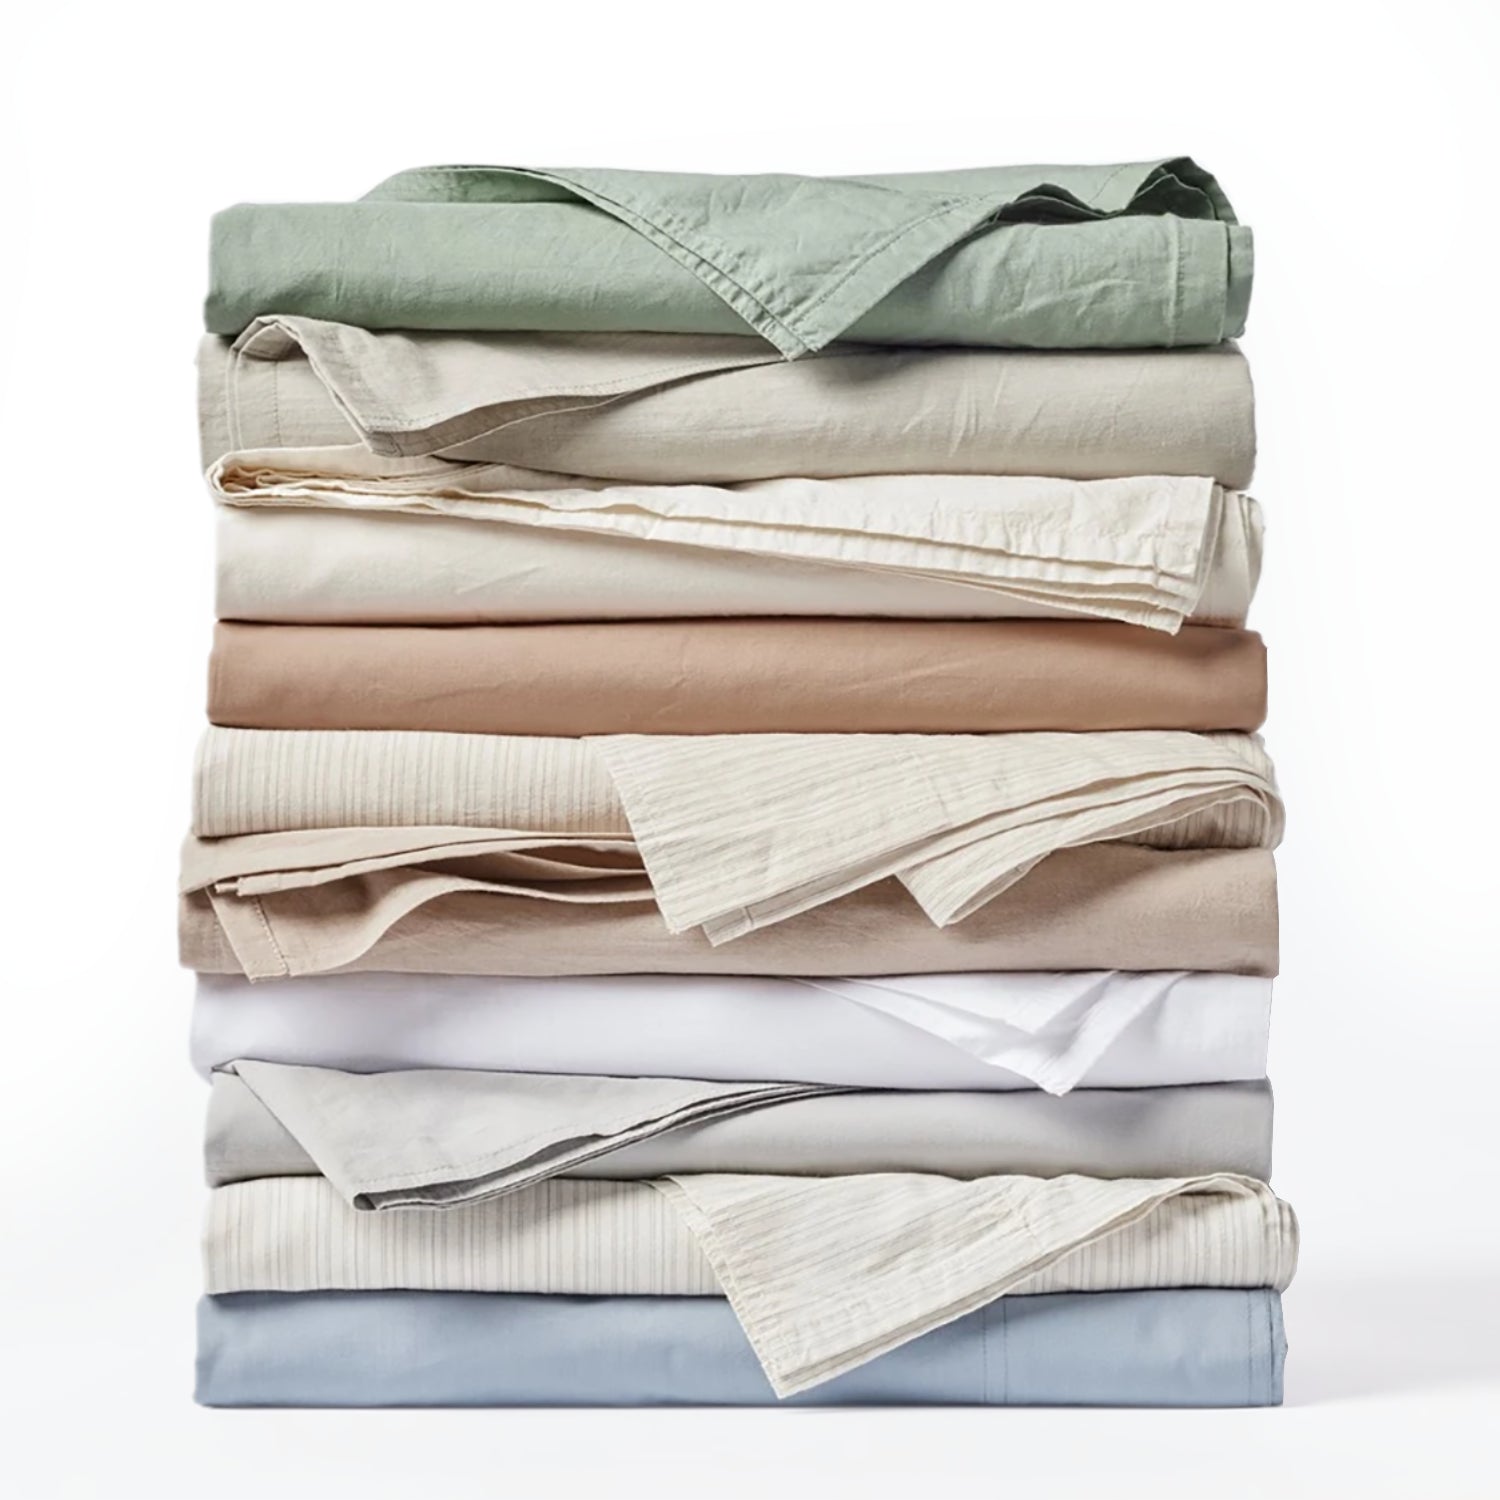 Coyuchi's crinkled percale sheets are the coolest, softest, most relaxed and breathable sheets. 